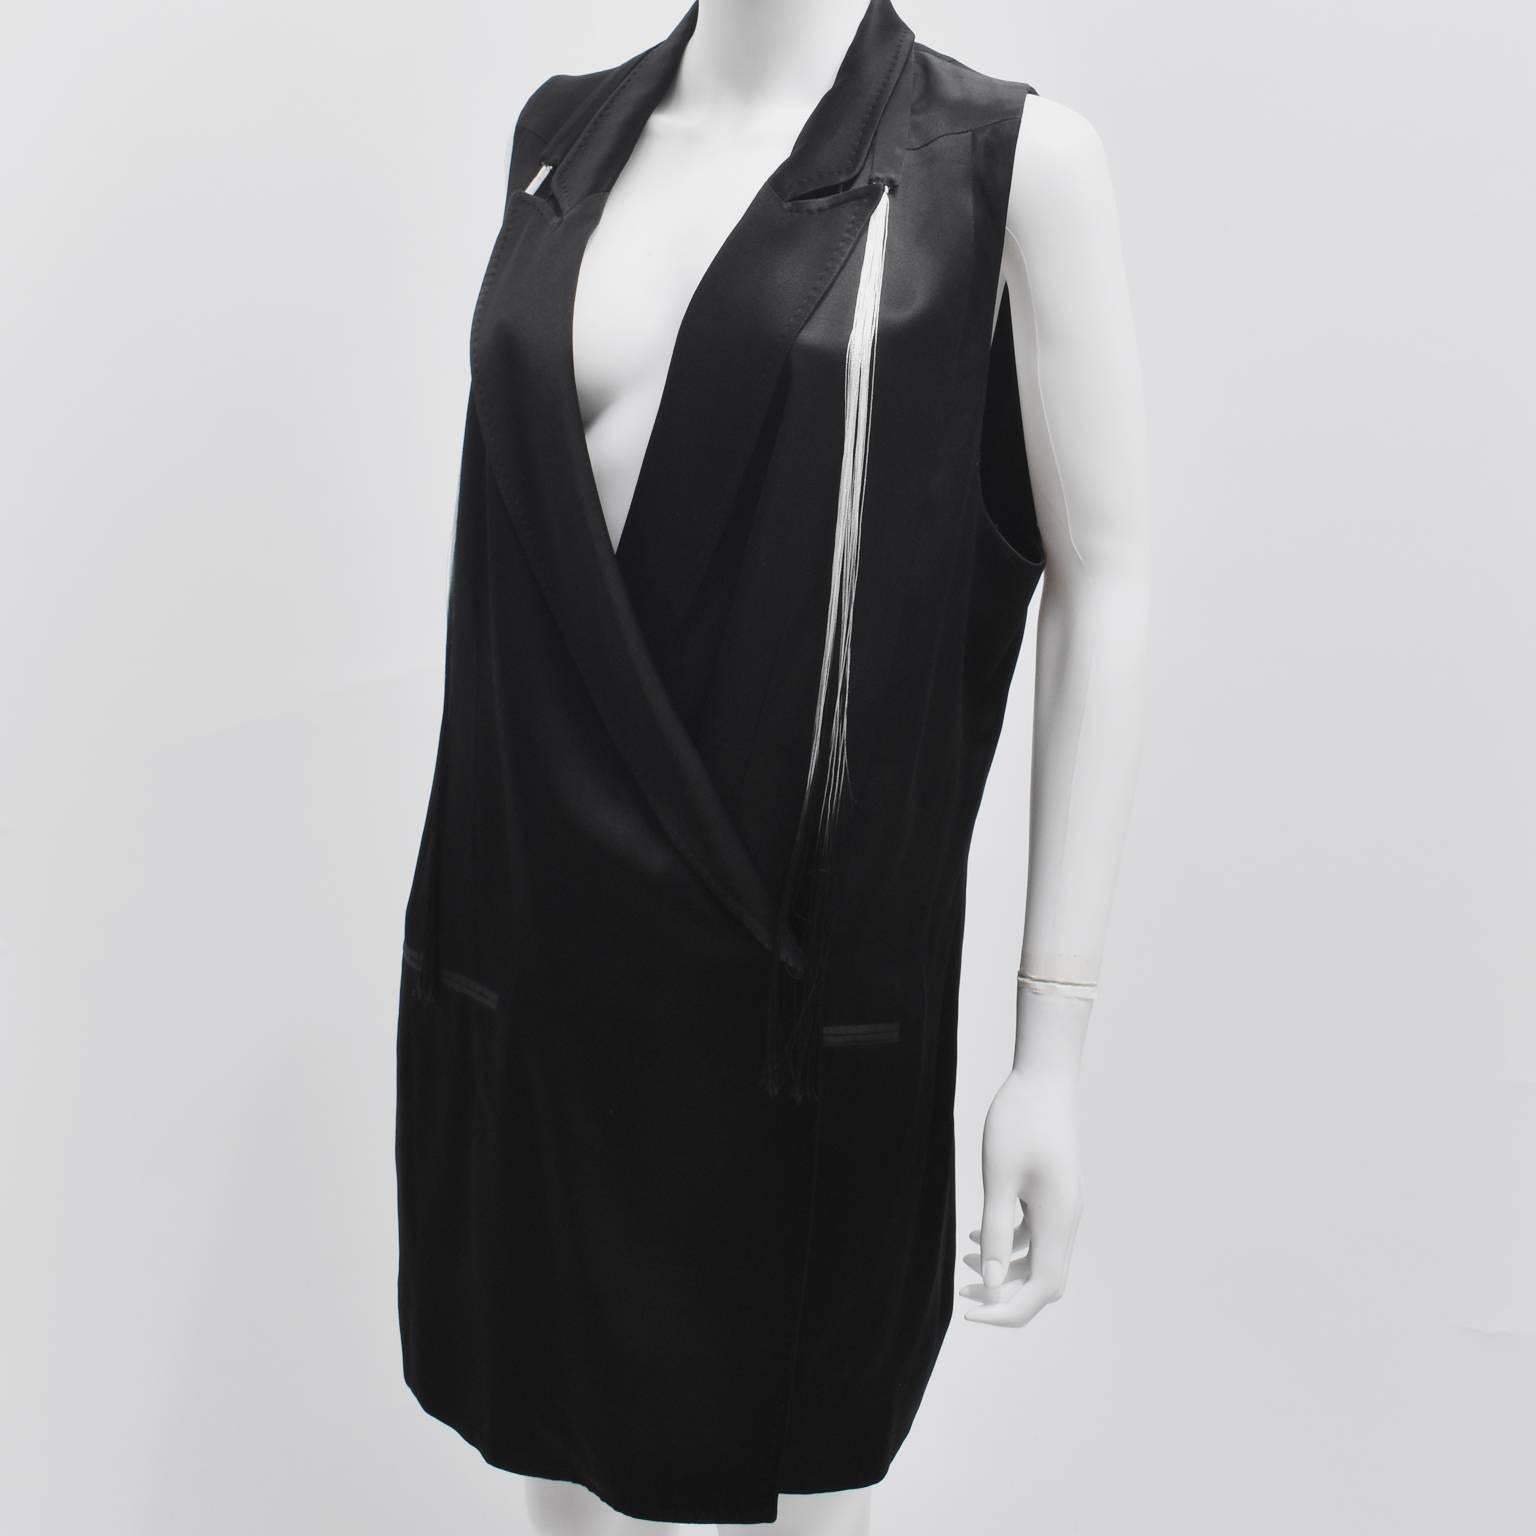 An elegant and interesting tuxedo jacket from Belgian designer Ann Demeulemeester. The jacket has a sleeveless cut with a longline, oversized shape. It has a straight cut with a large notched collar and a crossover button fastening on the left side